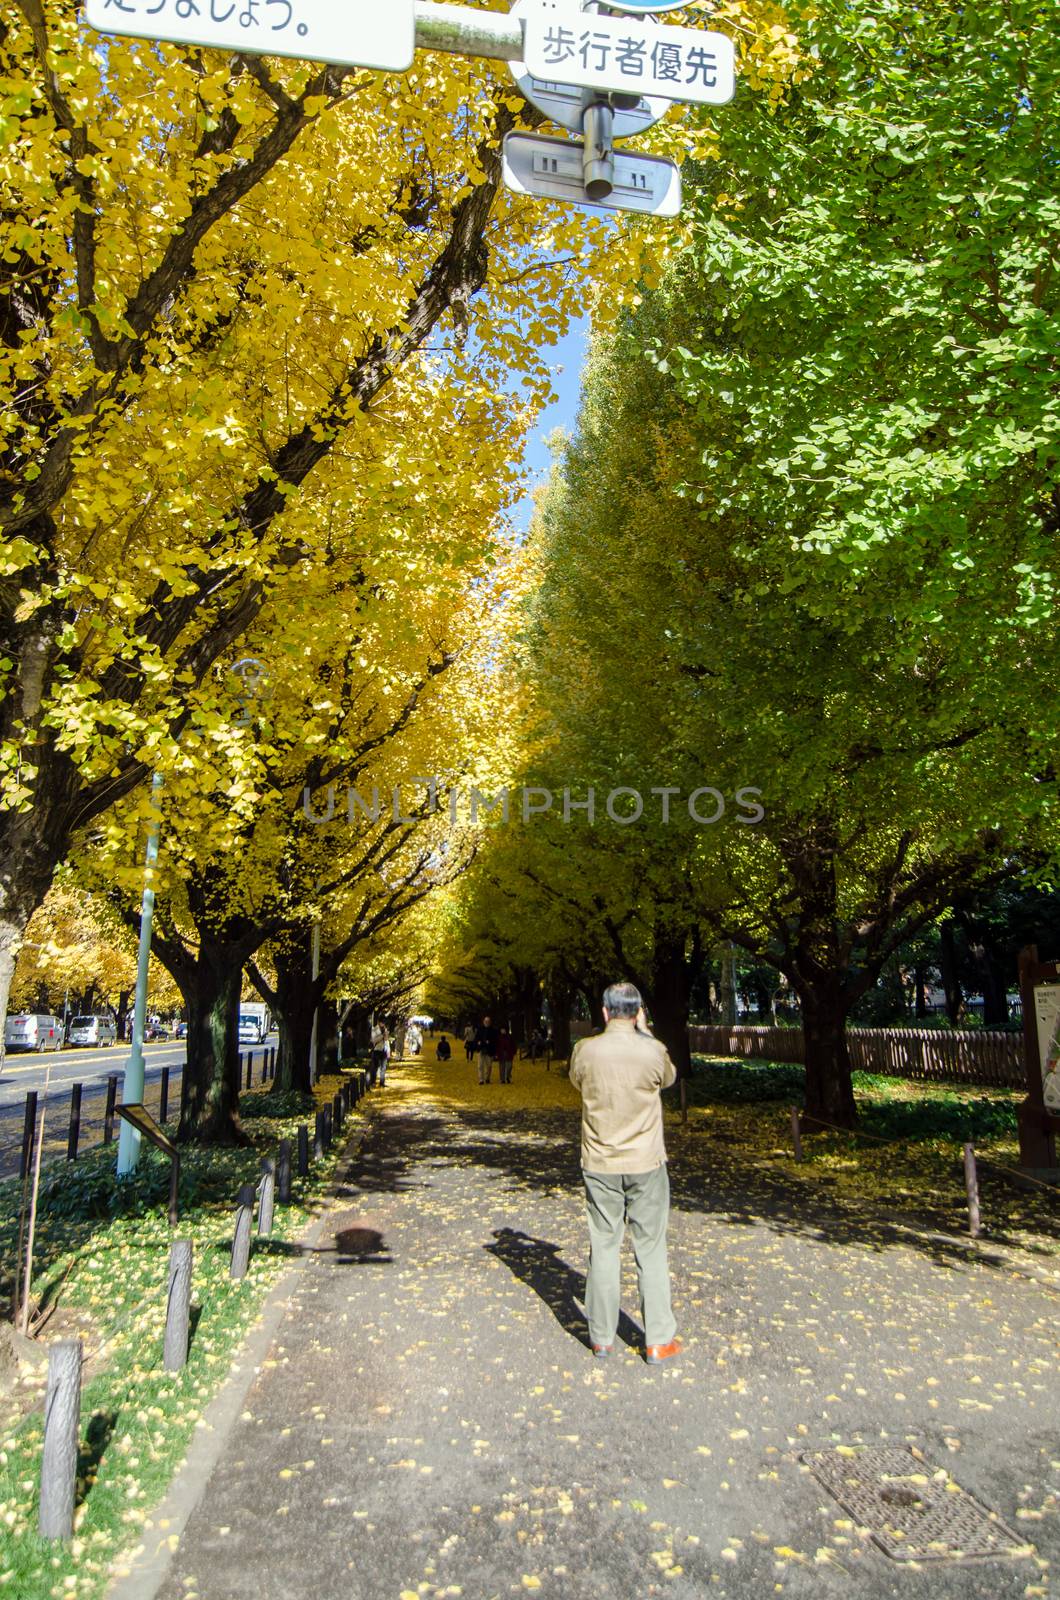 Tokyo, Japan - November 26, 2013: People visit Ginkgo Tree Avenue heading down to the Meiji Memorial Picture Gallery on November 26, 2013 in Tokyo. Meiji Jingu Gaien is one of the best places in Tokyo to see the stunning red, orange and yellow autumn leaves.